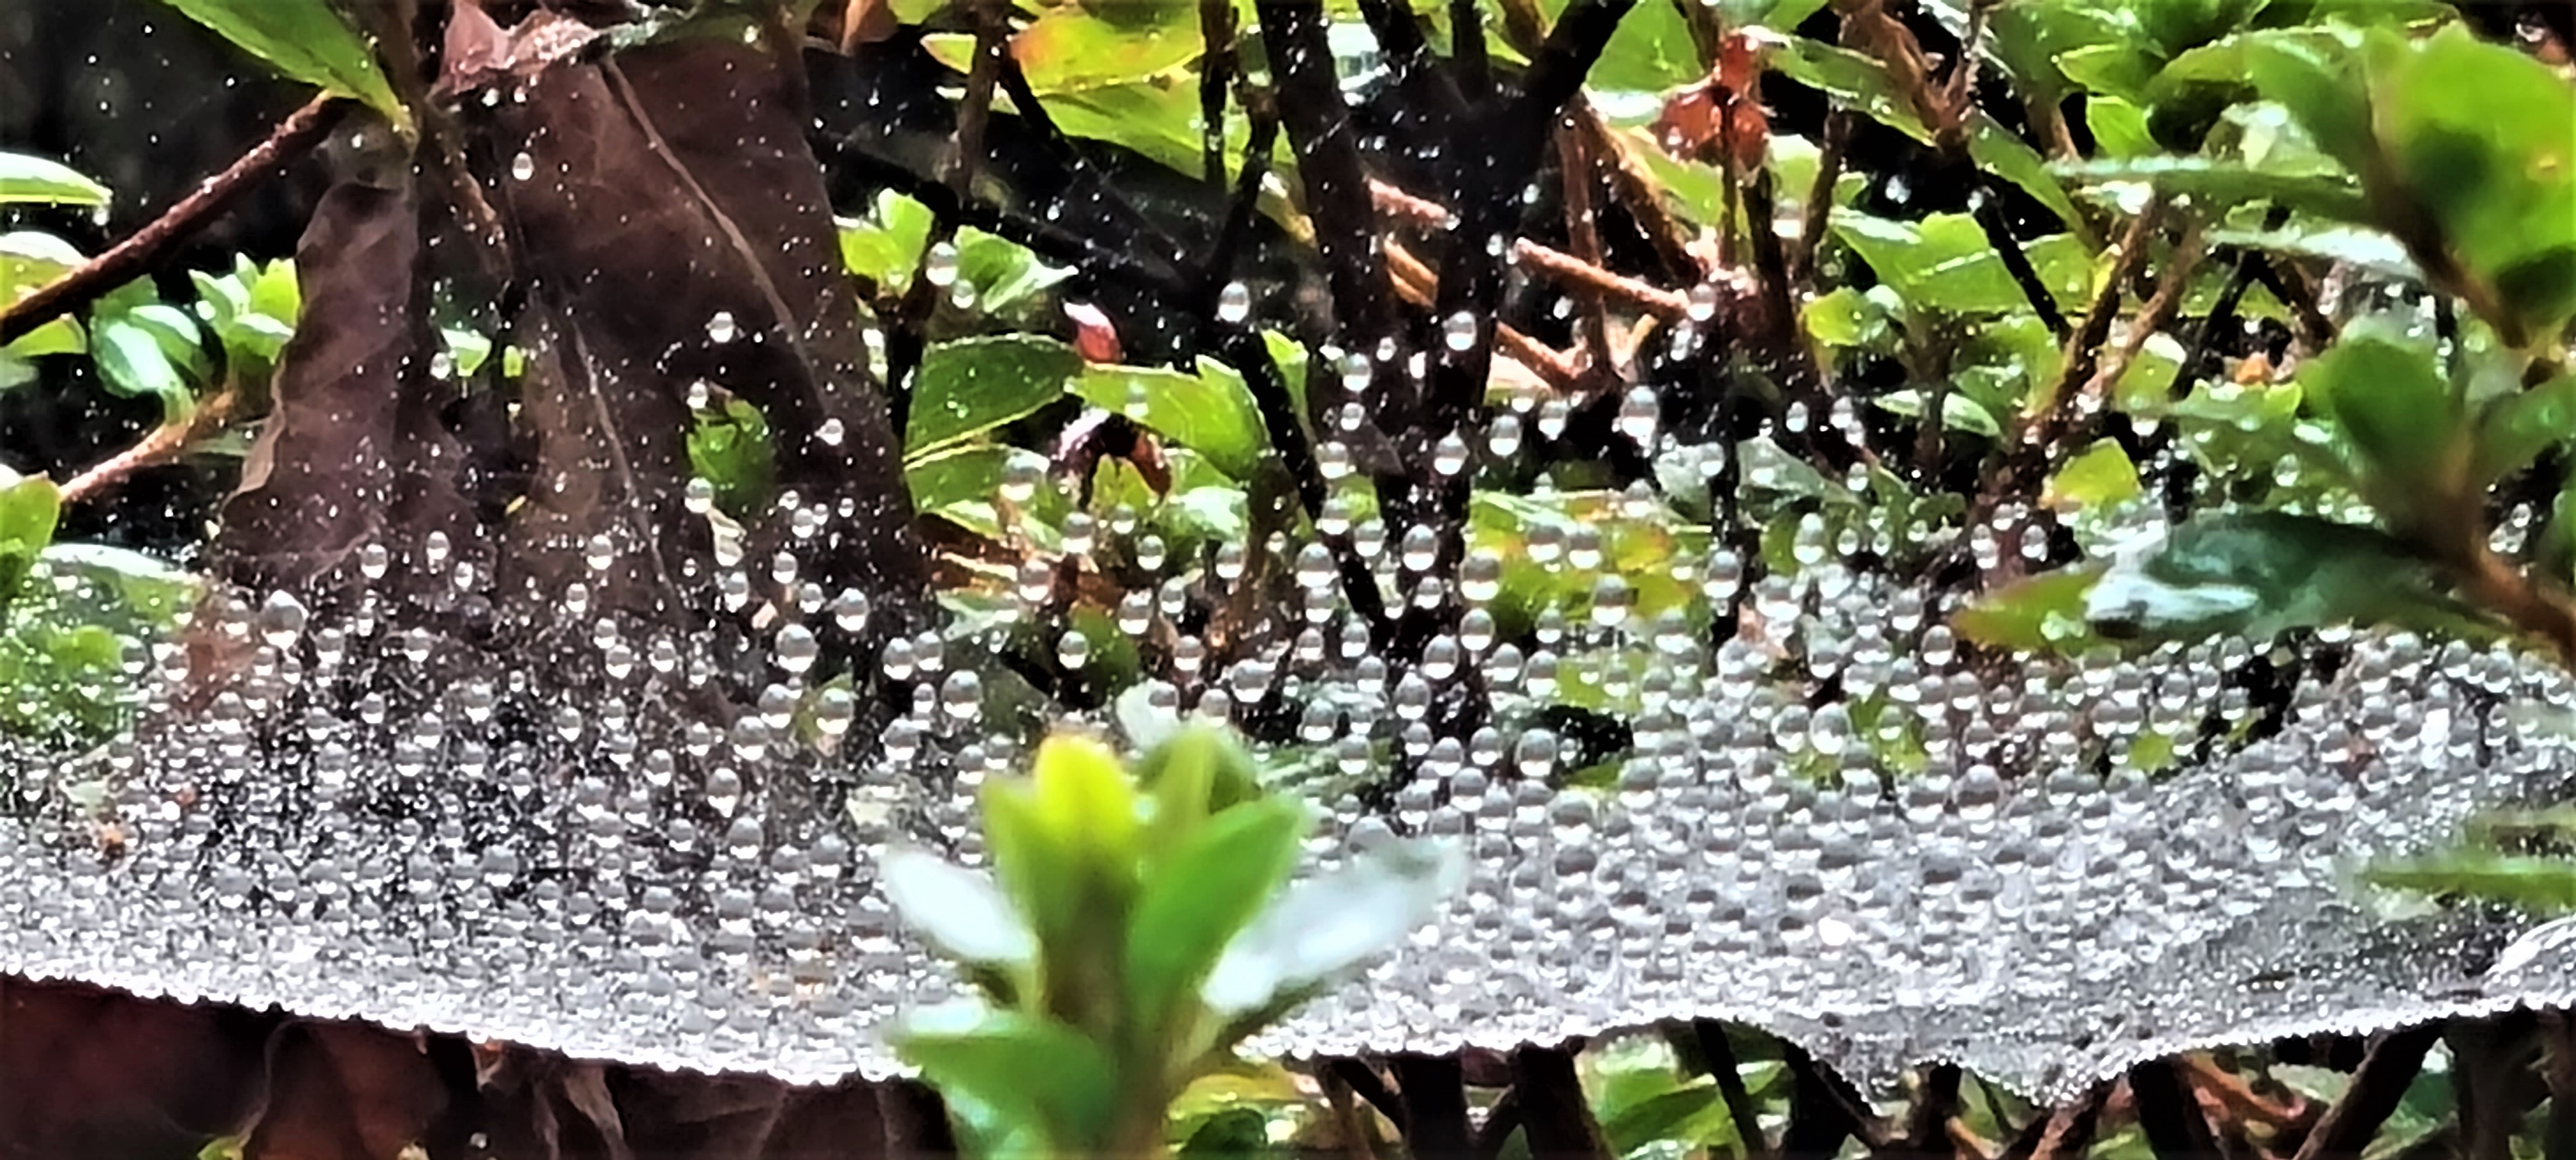 Water beads caught in a spider’s web